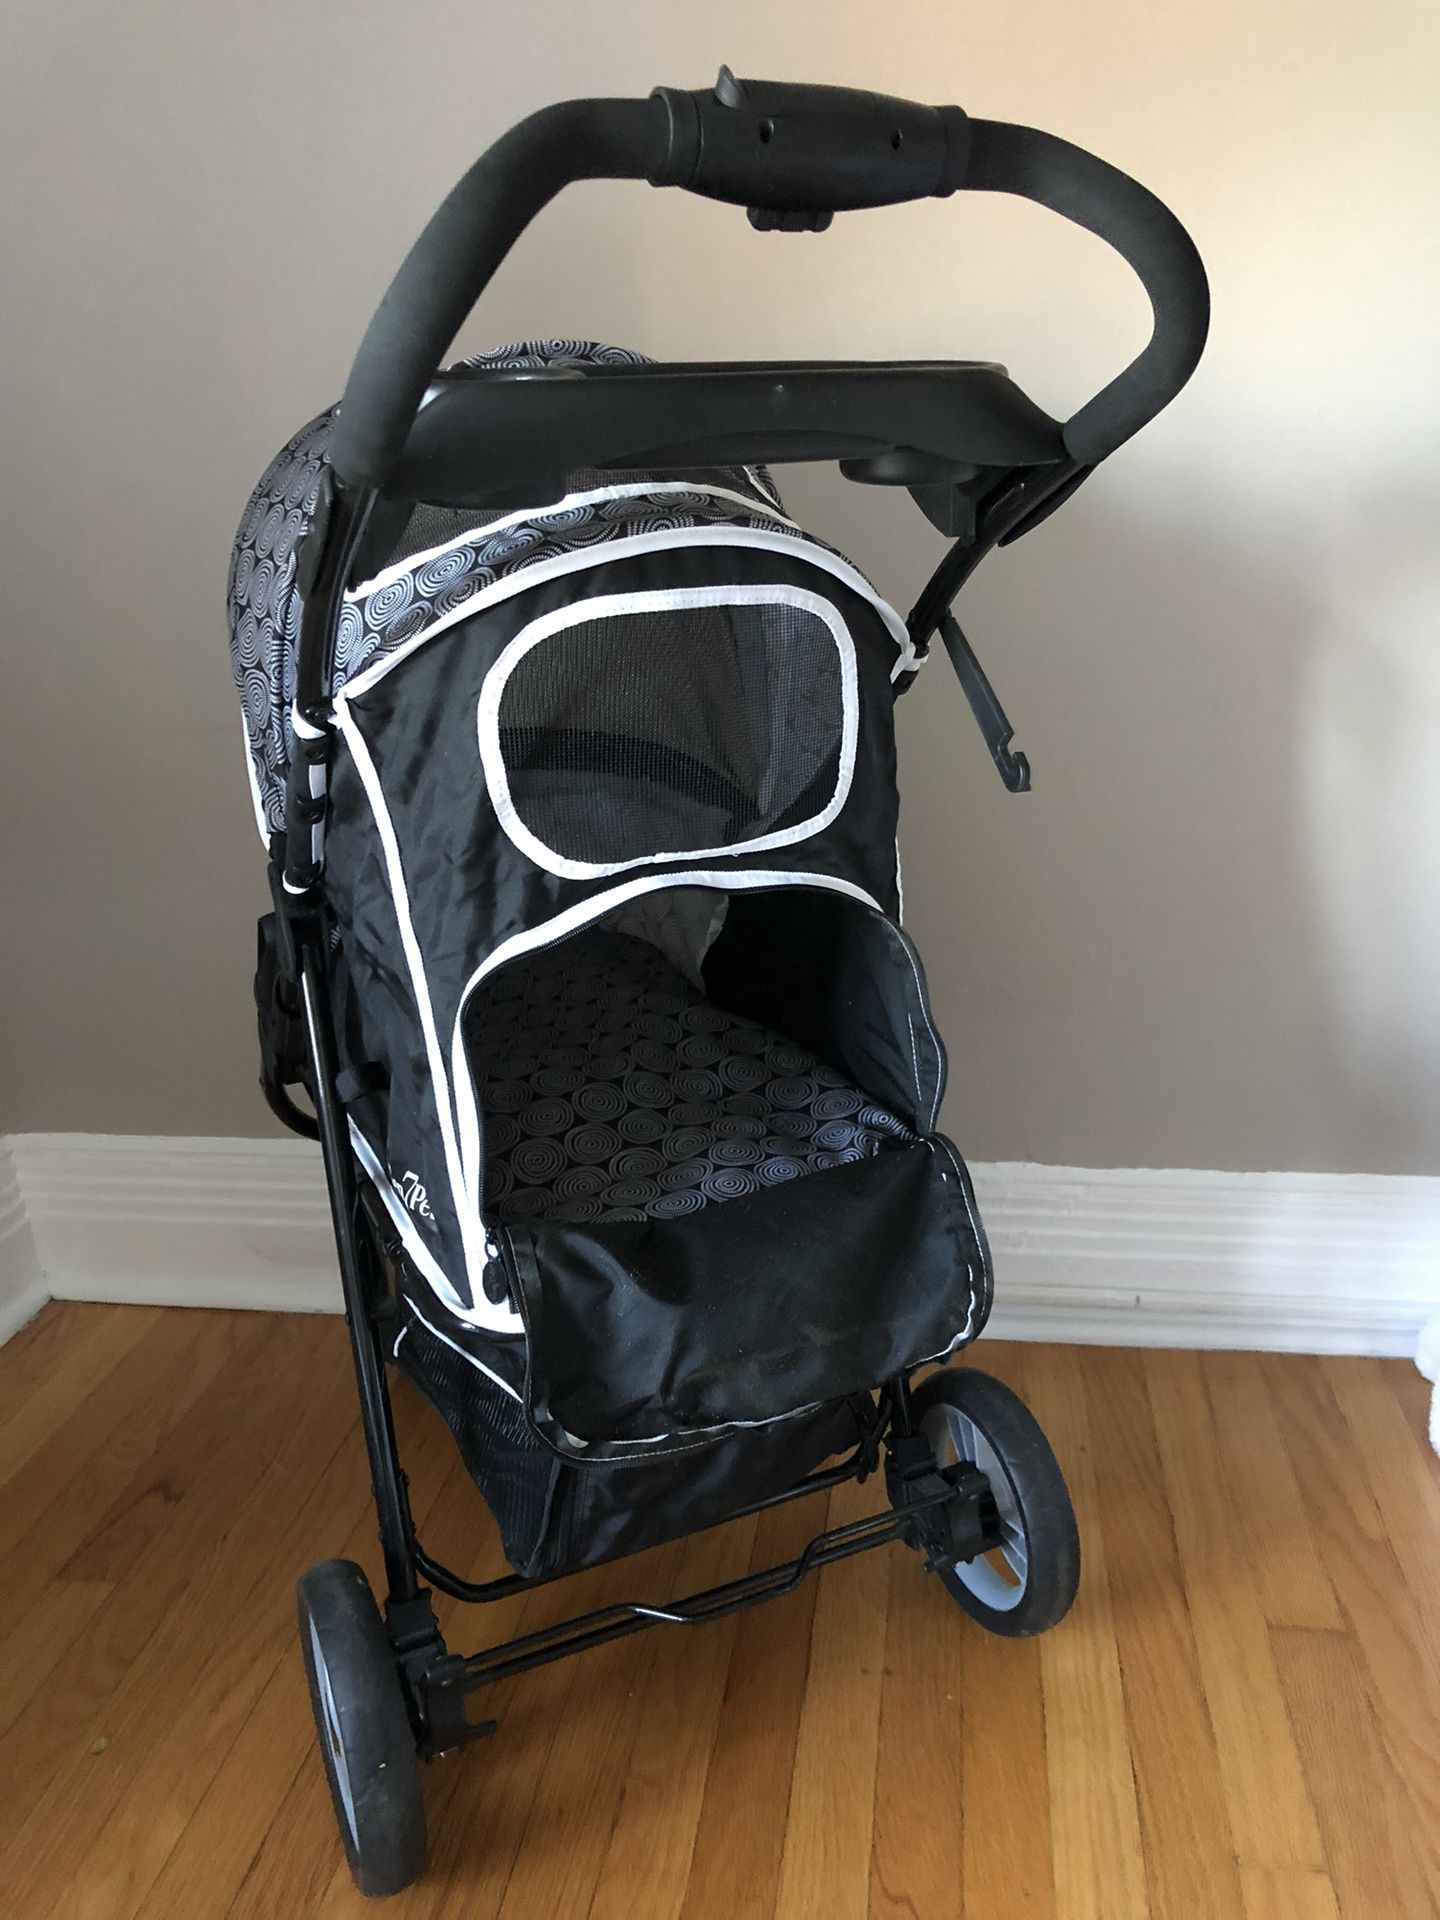 Pet Stroller For Up To 25 Lbs